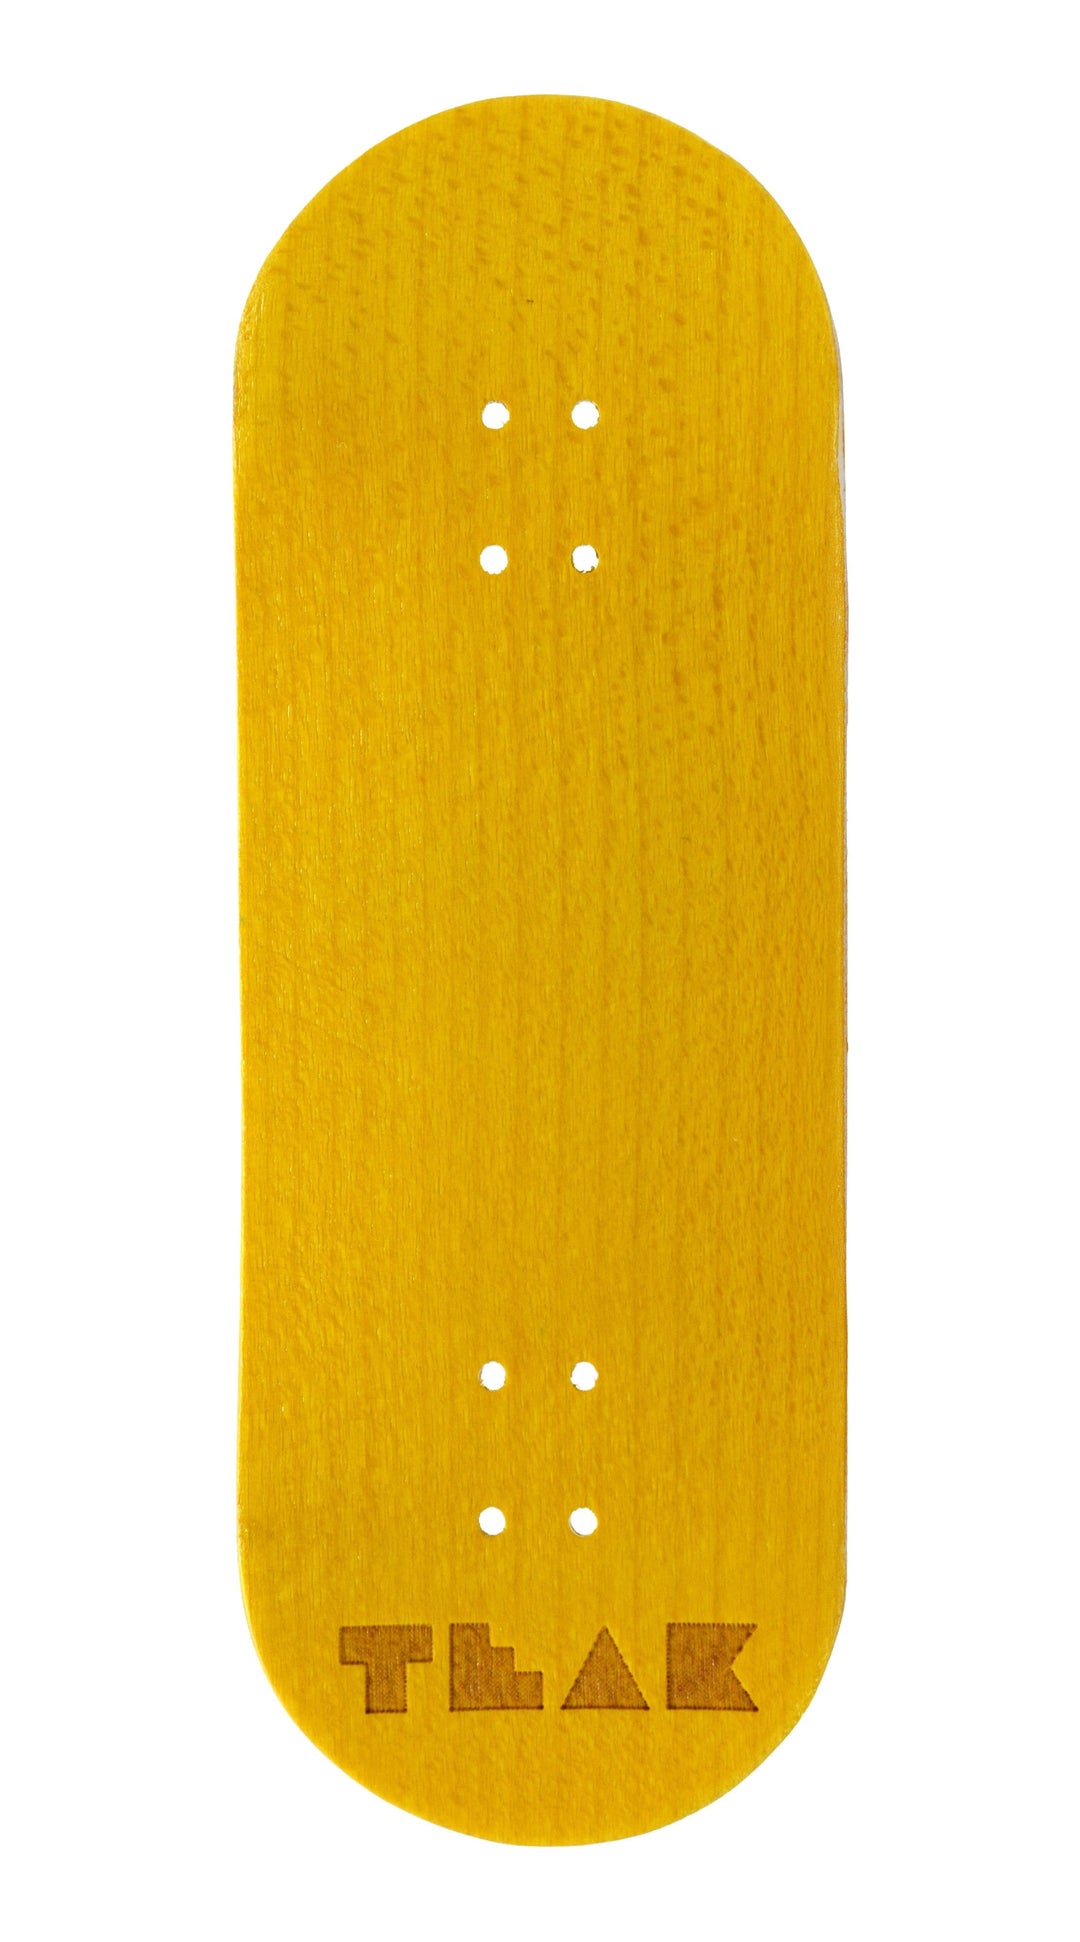 Teak Tuning PROlific Wooden 5 Ply Fingerboard Deck 32x95mm - Banana Yellow - with Color Matching Mid Ply